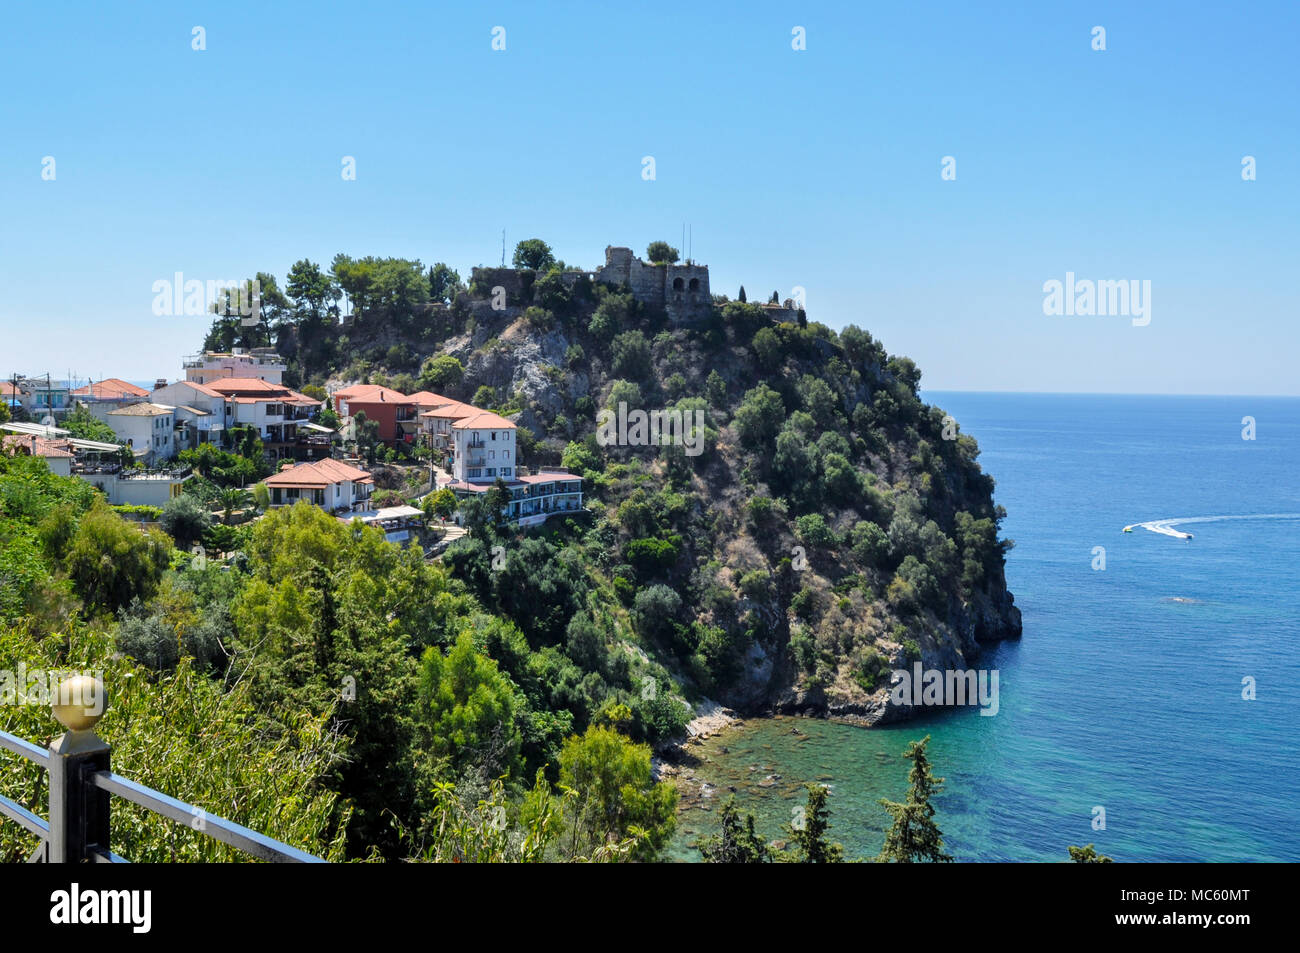 Parga, Epirus -Greece. Parga lies on the Ionian coast. It's a coastal resort town known for its natural environment. Castle of Parga ontop of the hill Stock Photo